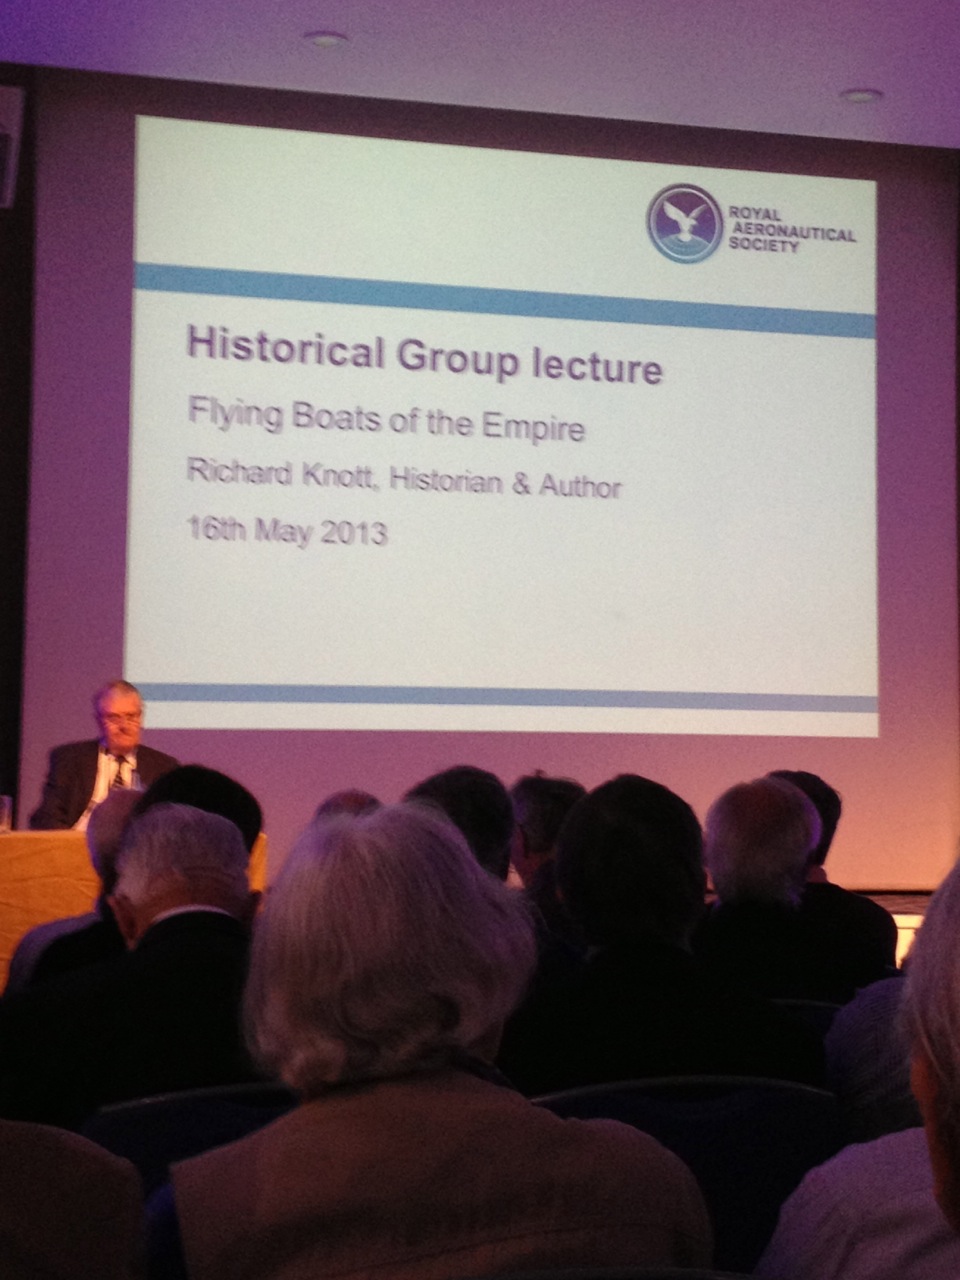 Royal Aeronautical Society Lecture on Flying Boats of the Empire